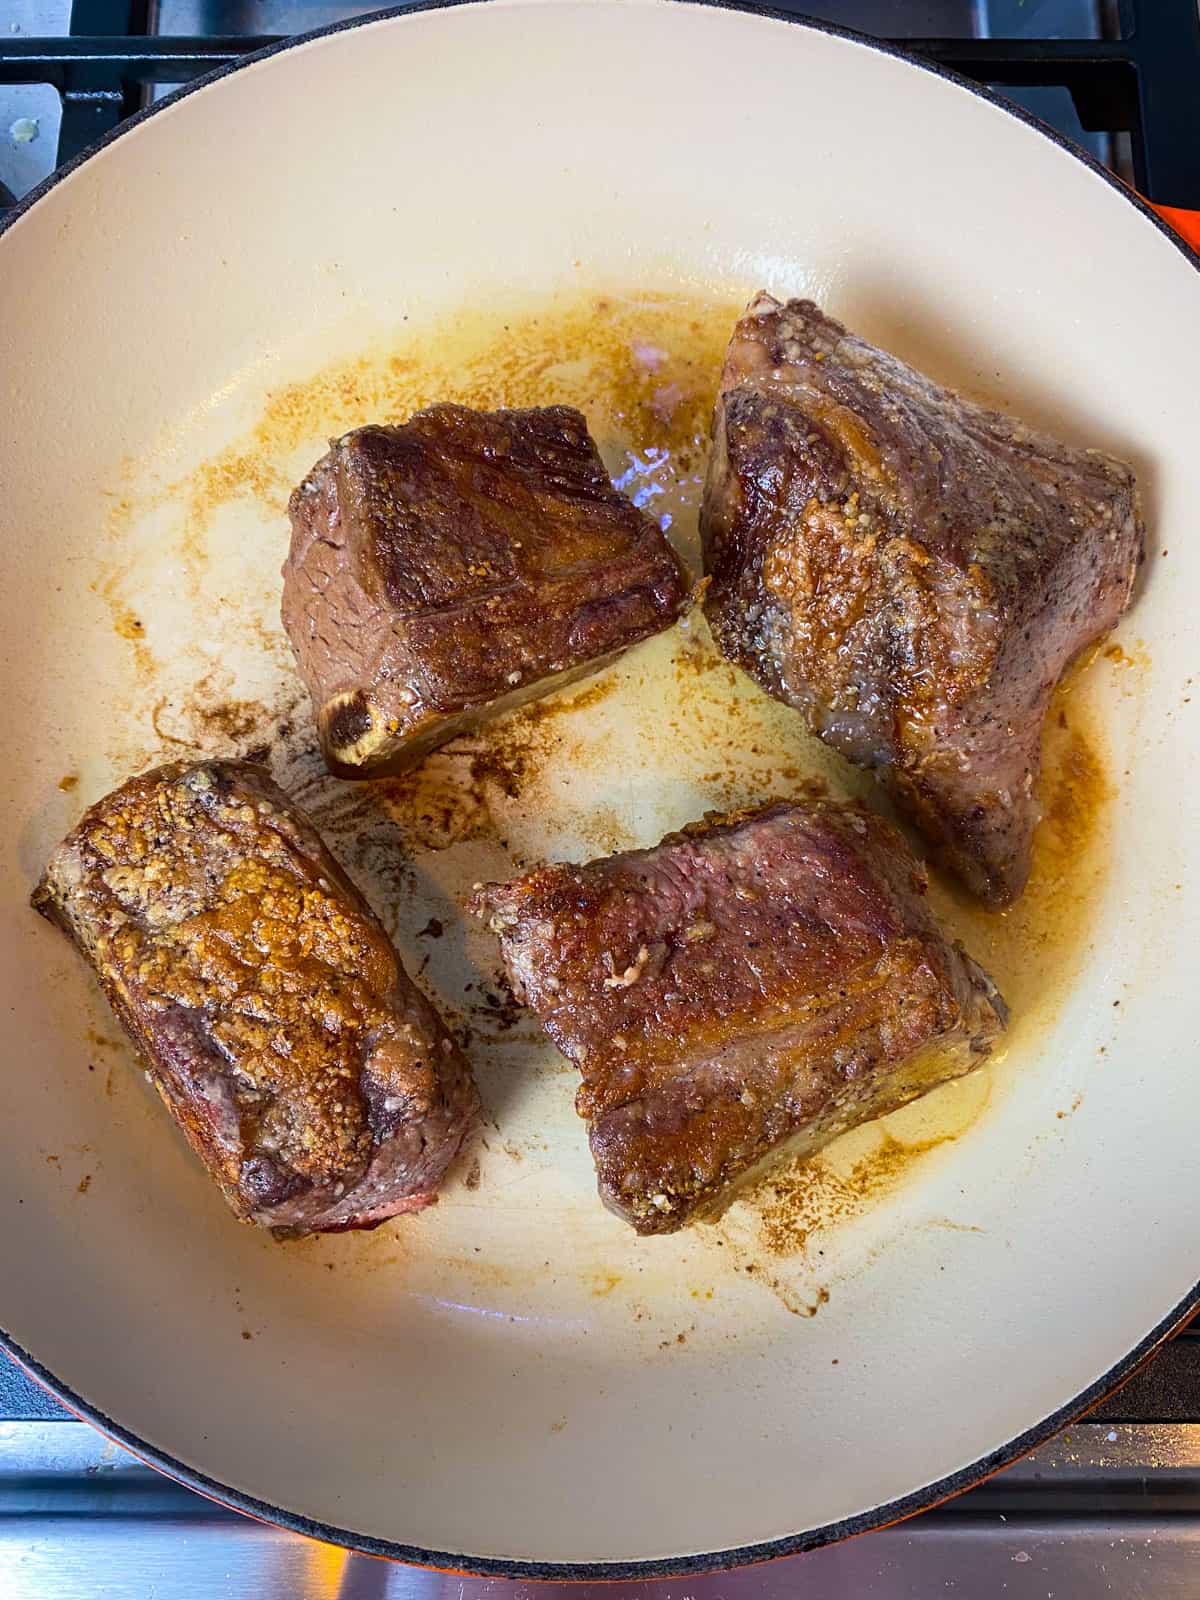 Sear the short ribs in a hot Dutch oven until deeply charred on all side.